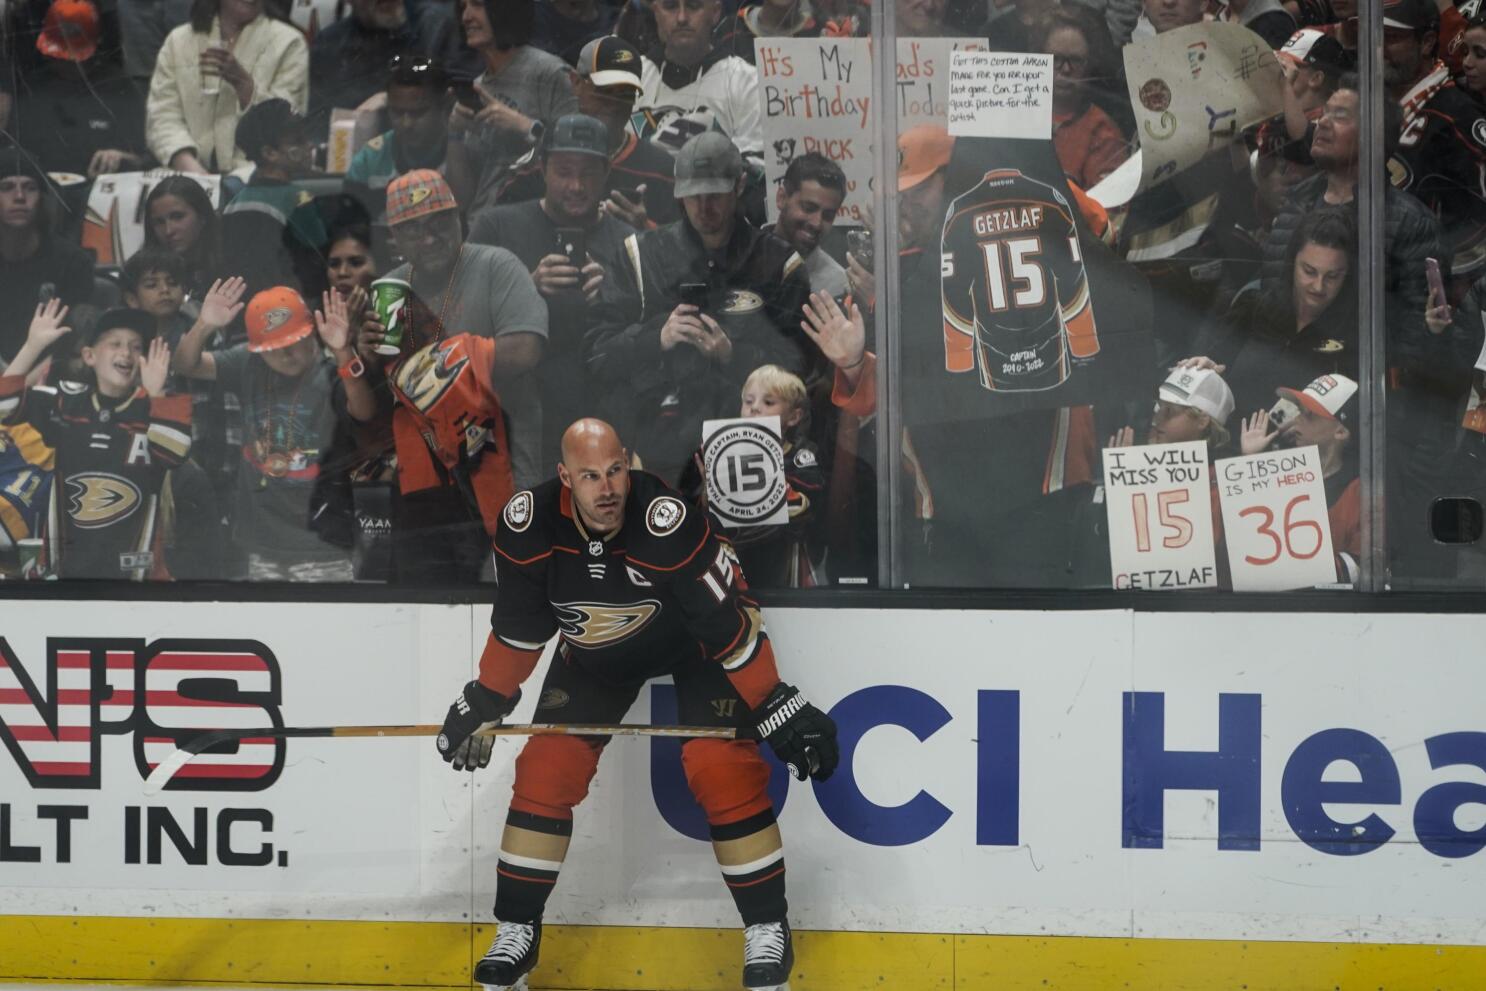 Anaheim Ducks - A legend in the hockey world. We wanted to